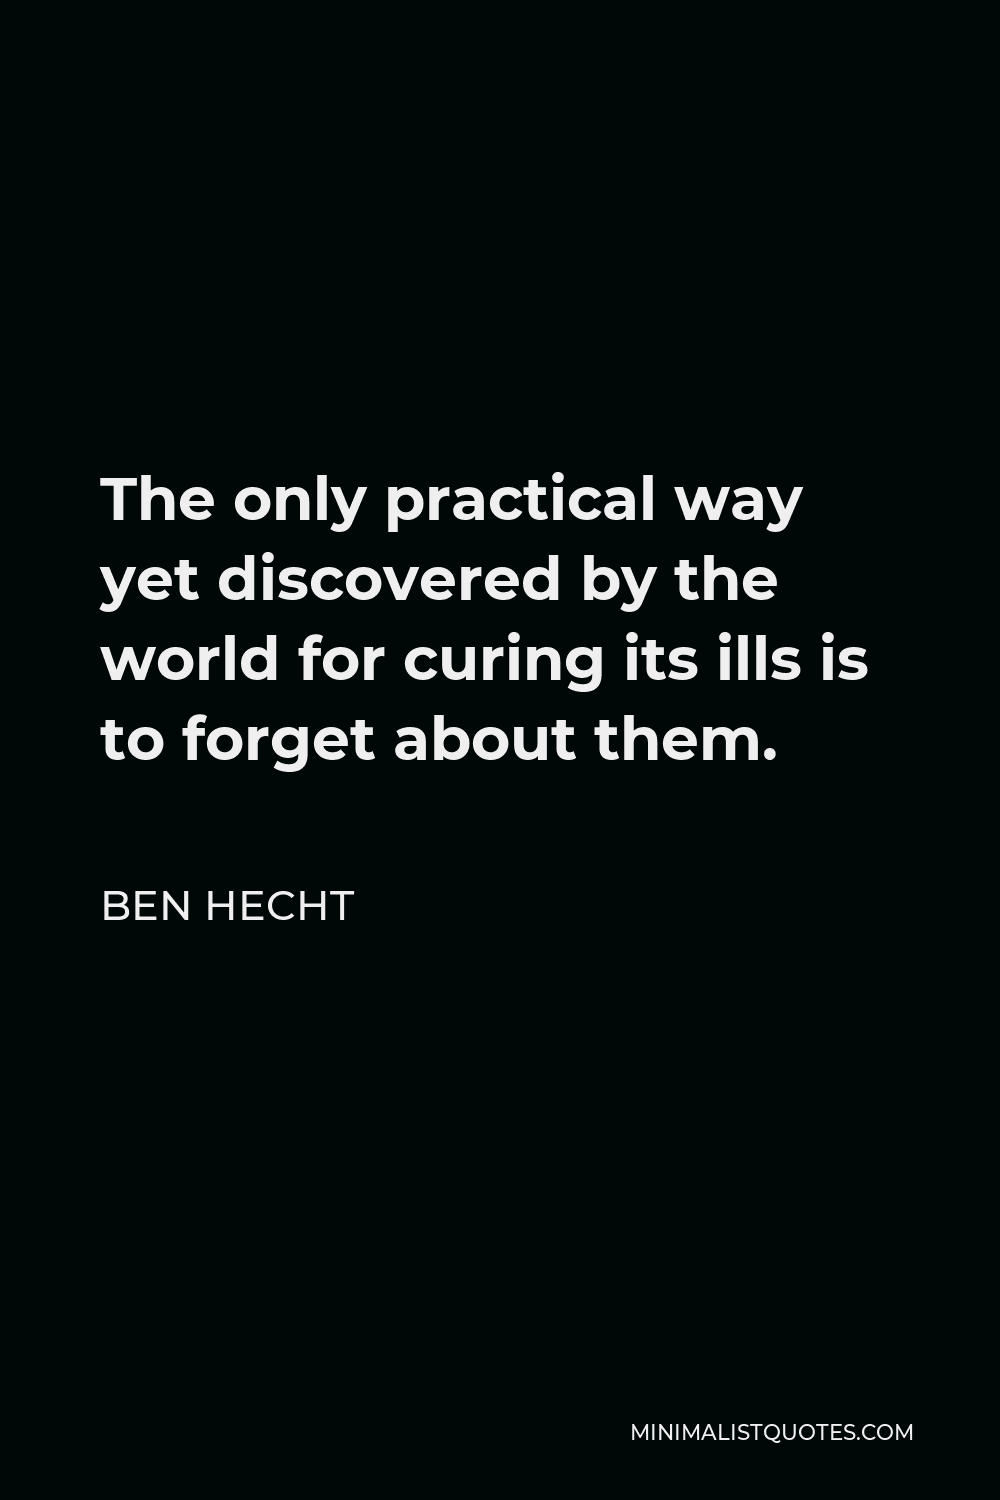 Ben Hecht Quote - The only practical way yet discovered by the world for curing its ills is to forget about them.